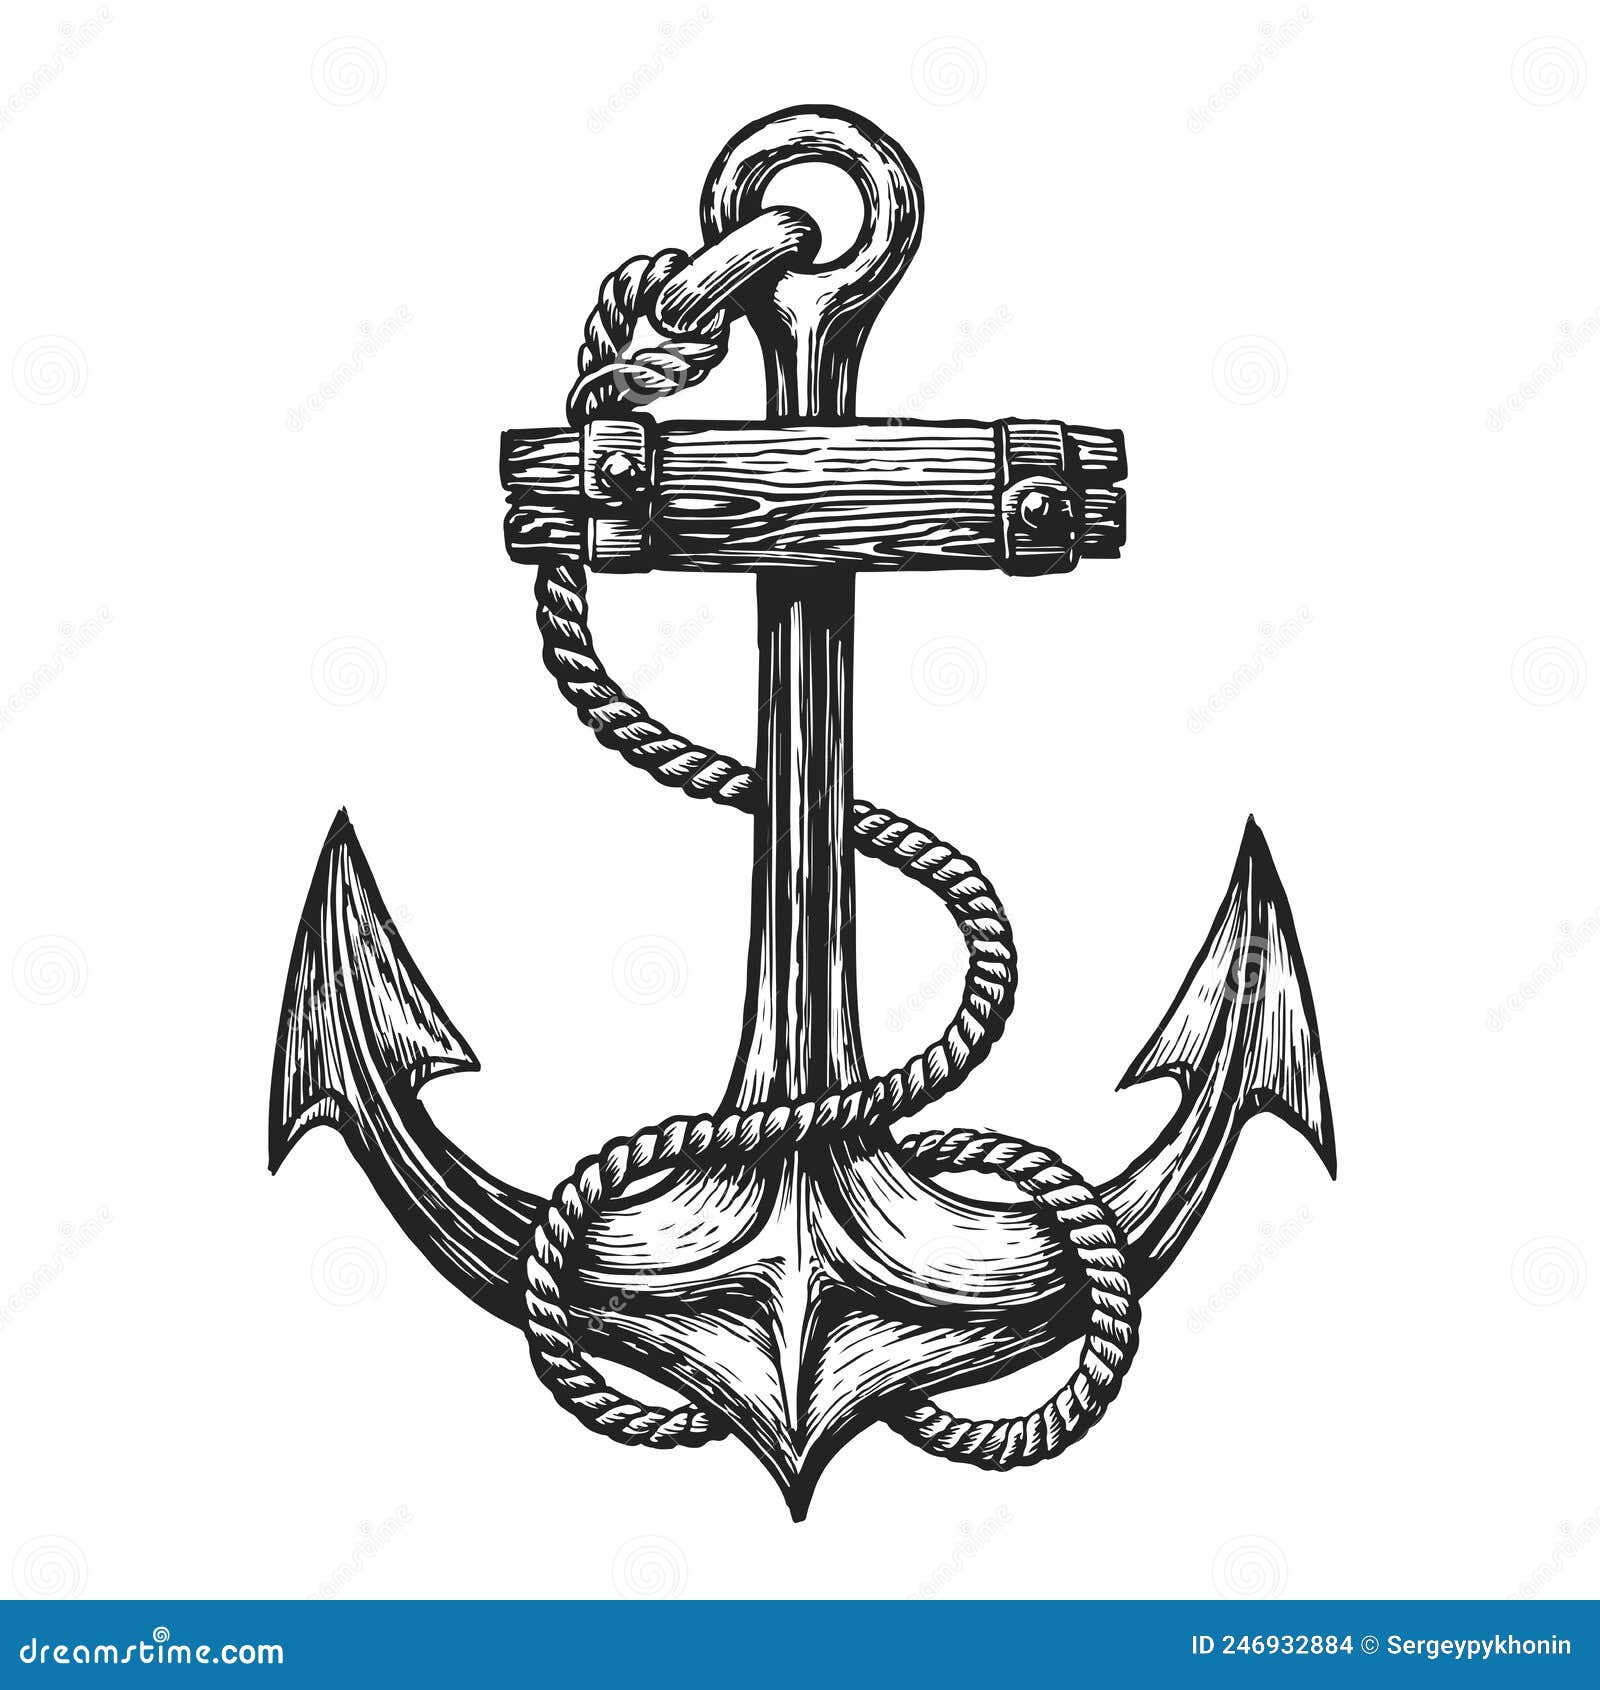 Vintage Anchor with Rope Drawn in Engraving Style. Hand Drawn Seafaring ...